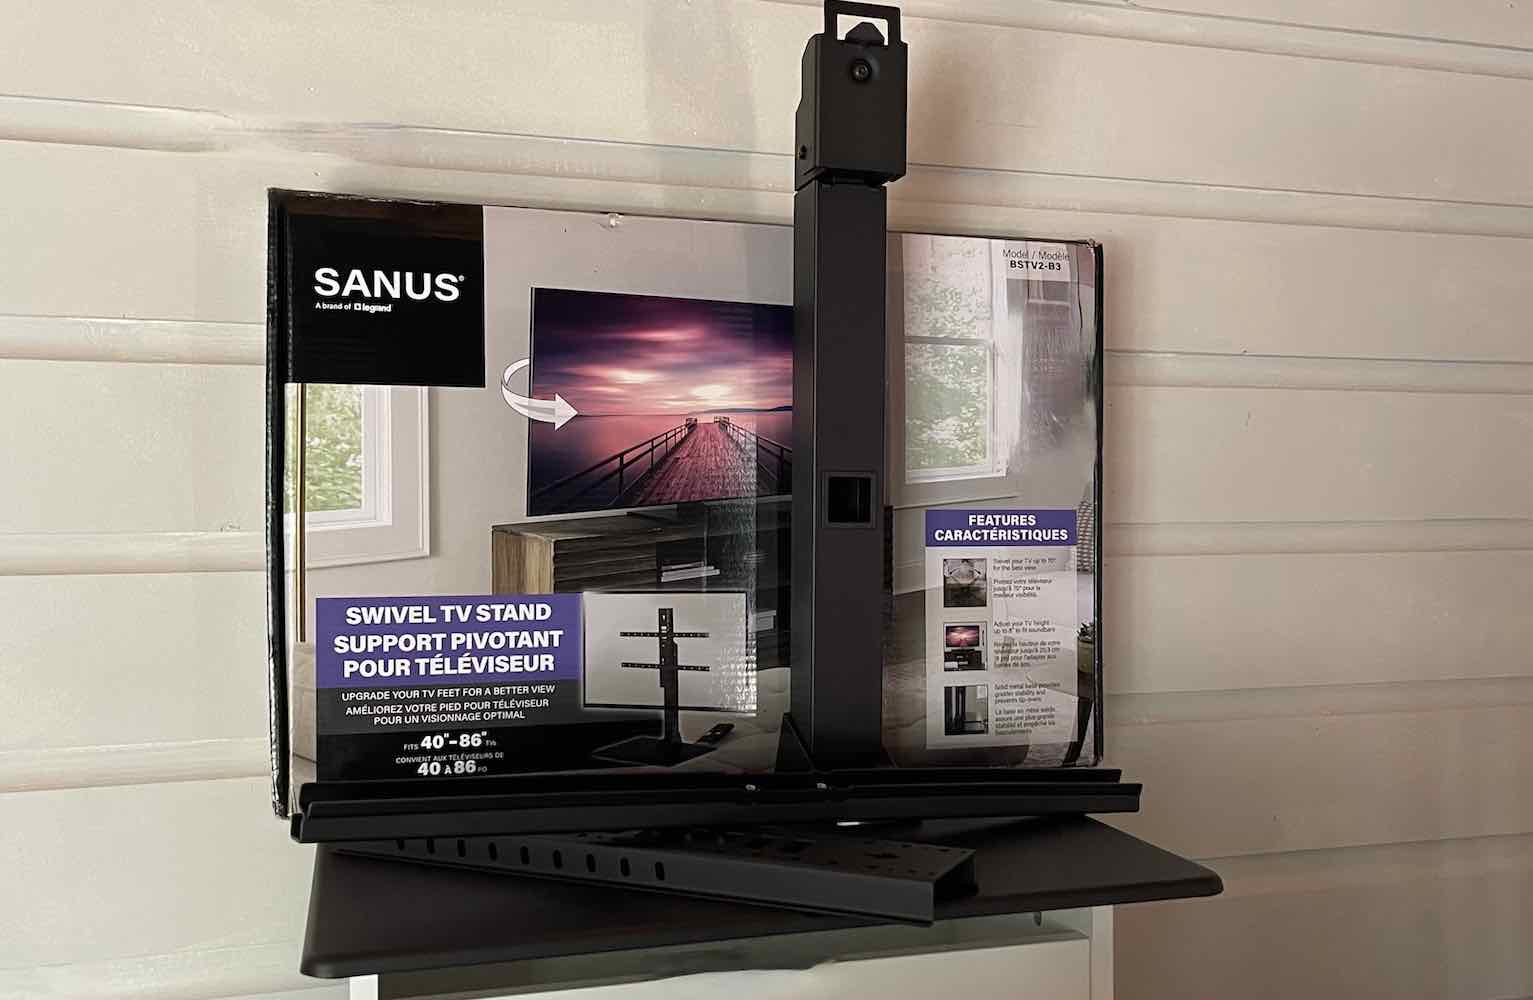 Sanus TV mount and stand review